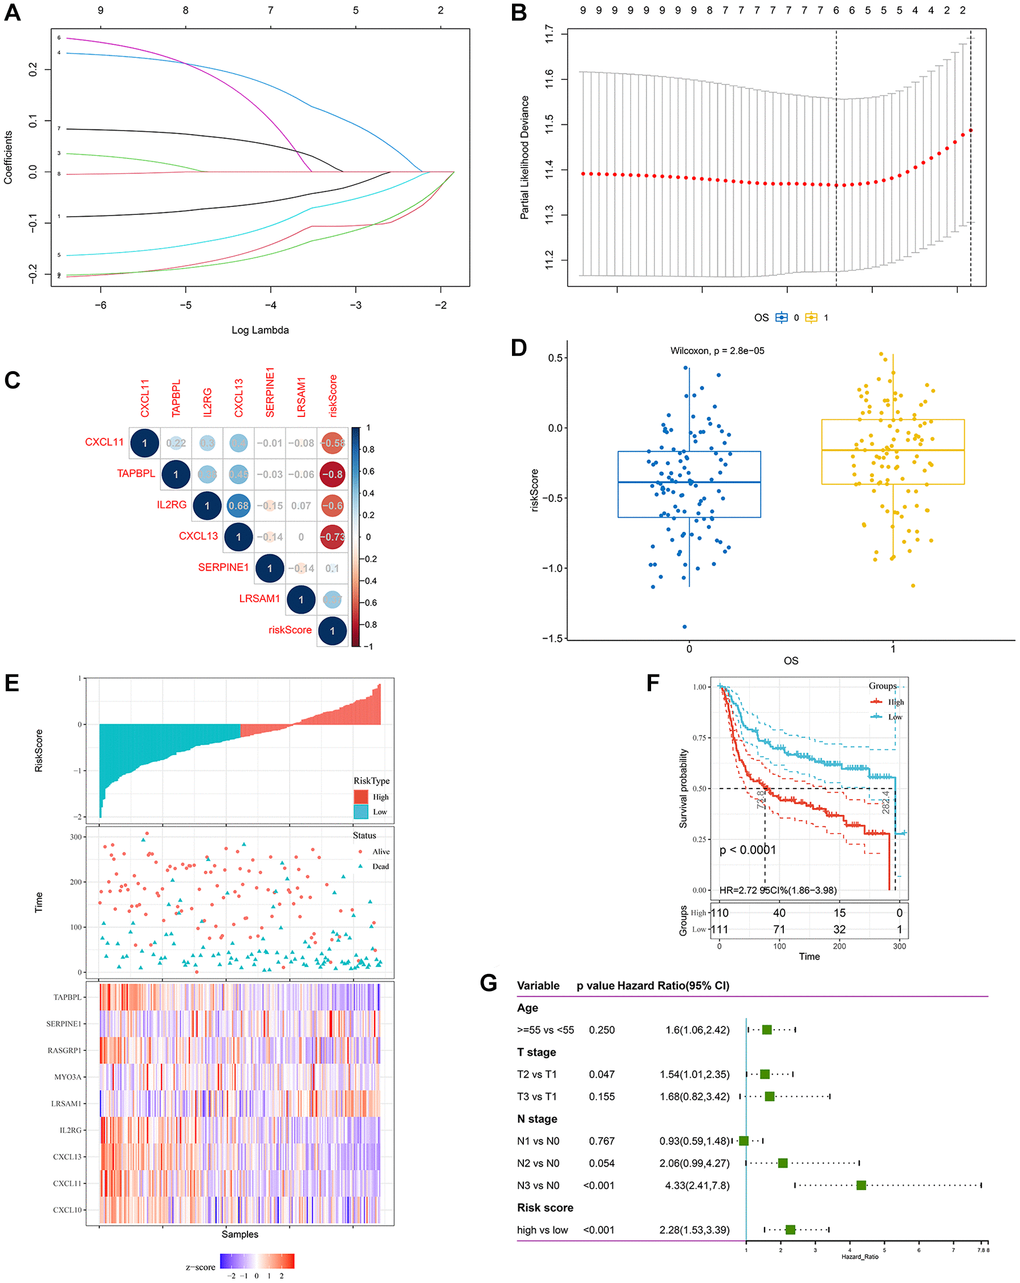 Construction of a hypoxia and immune-related gene signature for prognosis. (A, B) The LASSO coefficient profiles were constructed from 9 prognostic hypoxia and immune-related genes, and the tuning parameter (λ) was calculated based on the minimum criteria for OS with ten-fold cross validation. Six genes were selected according to the best fit profile. (C) Correlation between risk score and the selected 6 genes in the METABRIC cohort. (D) HIRS was remarkably increased in patients who died during follow-up. (E–F) Distributions of risk score, expression profile, and survival status of the gene signature. (G) Multivariate Cox regression model showed that HIRS as an independent risk factor for OS in the METABRIC cohort.